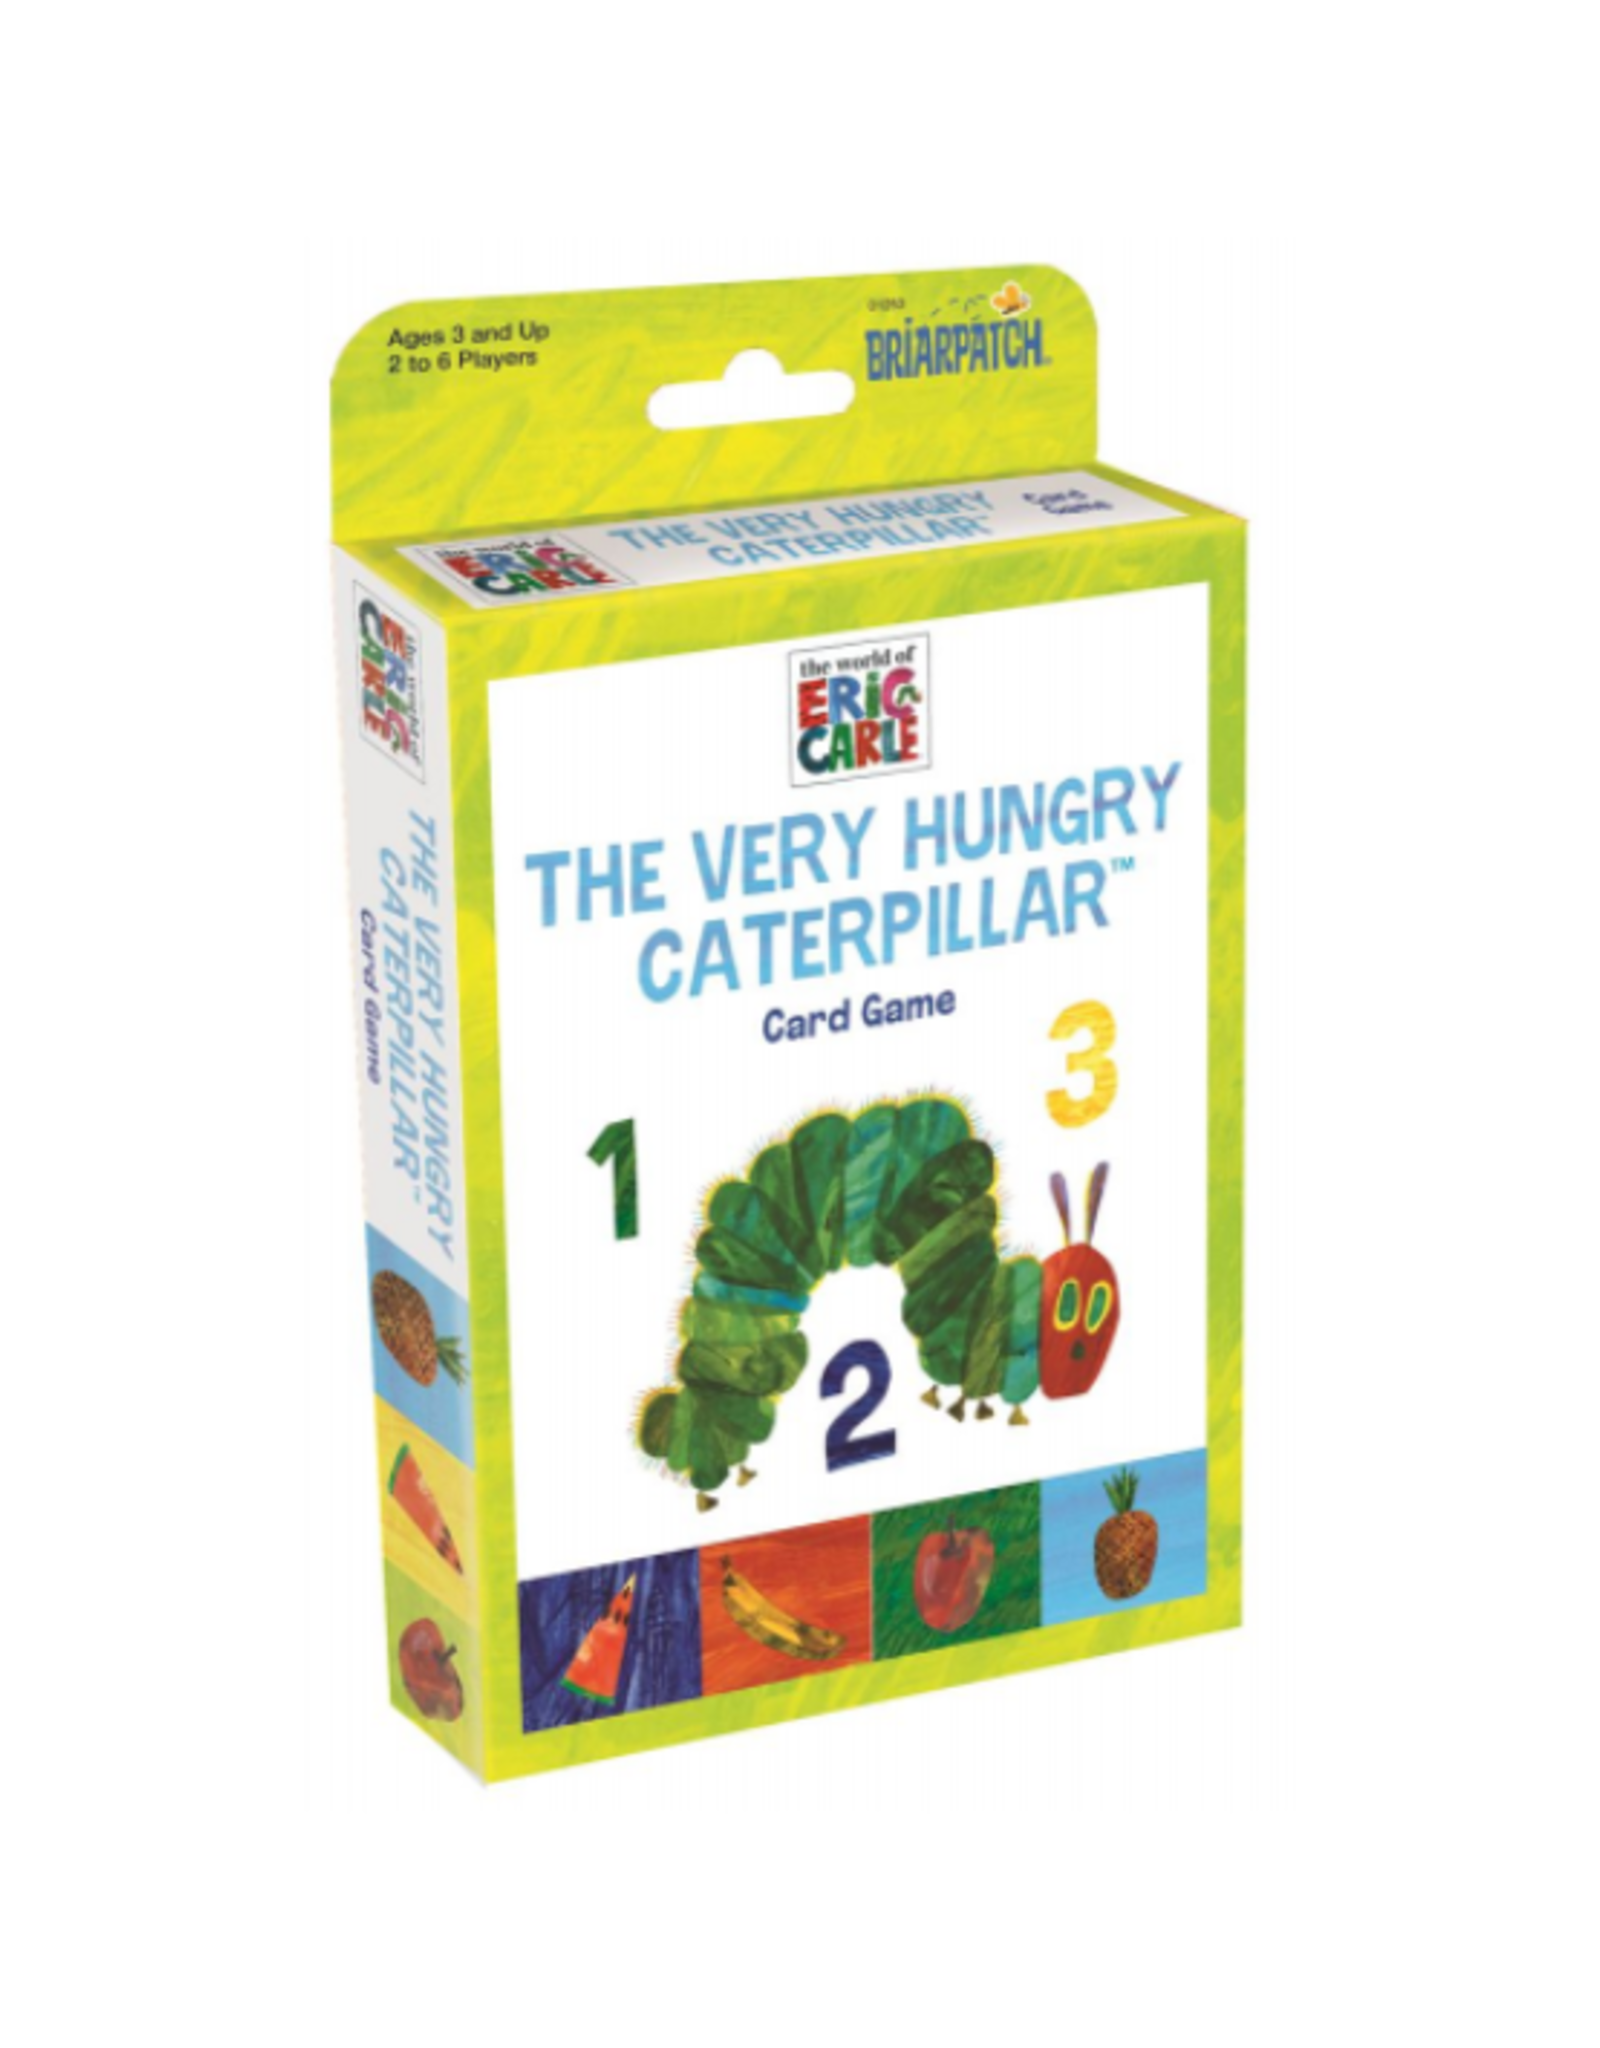 Briarpatch - World of Eric Carle - The Very Hungry Caterpillar Card Game